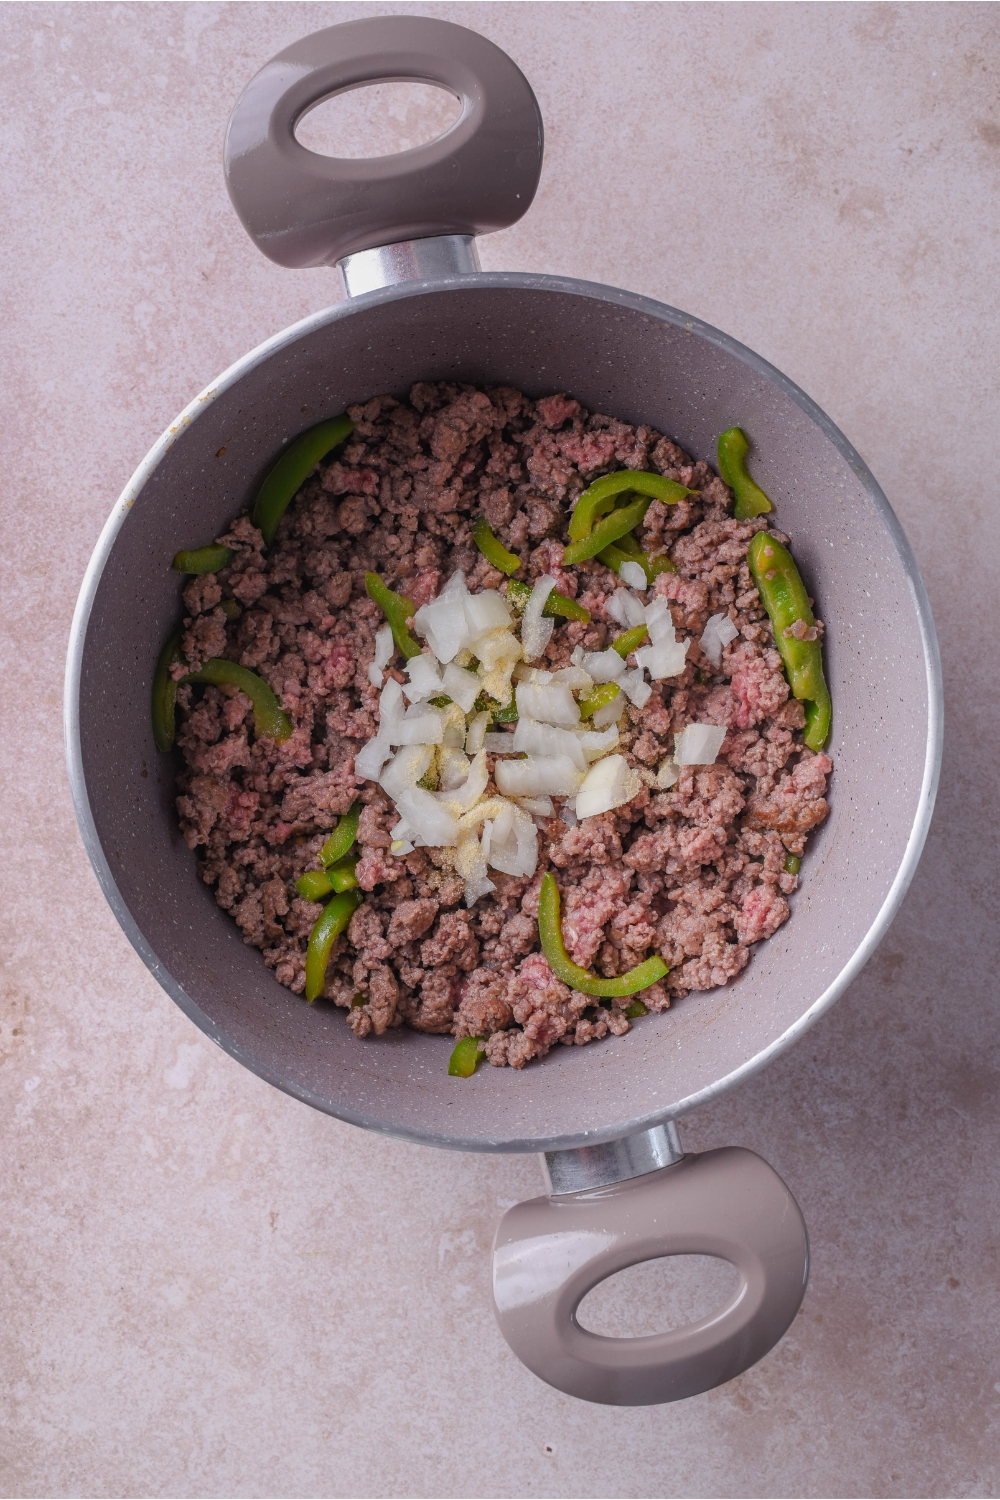 Large grey pot filled with cooked ground beef, sliced green peppers, and diced onions in the center of the pot.